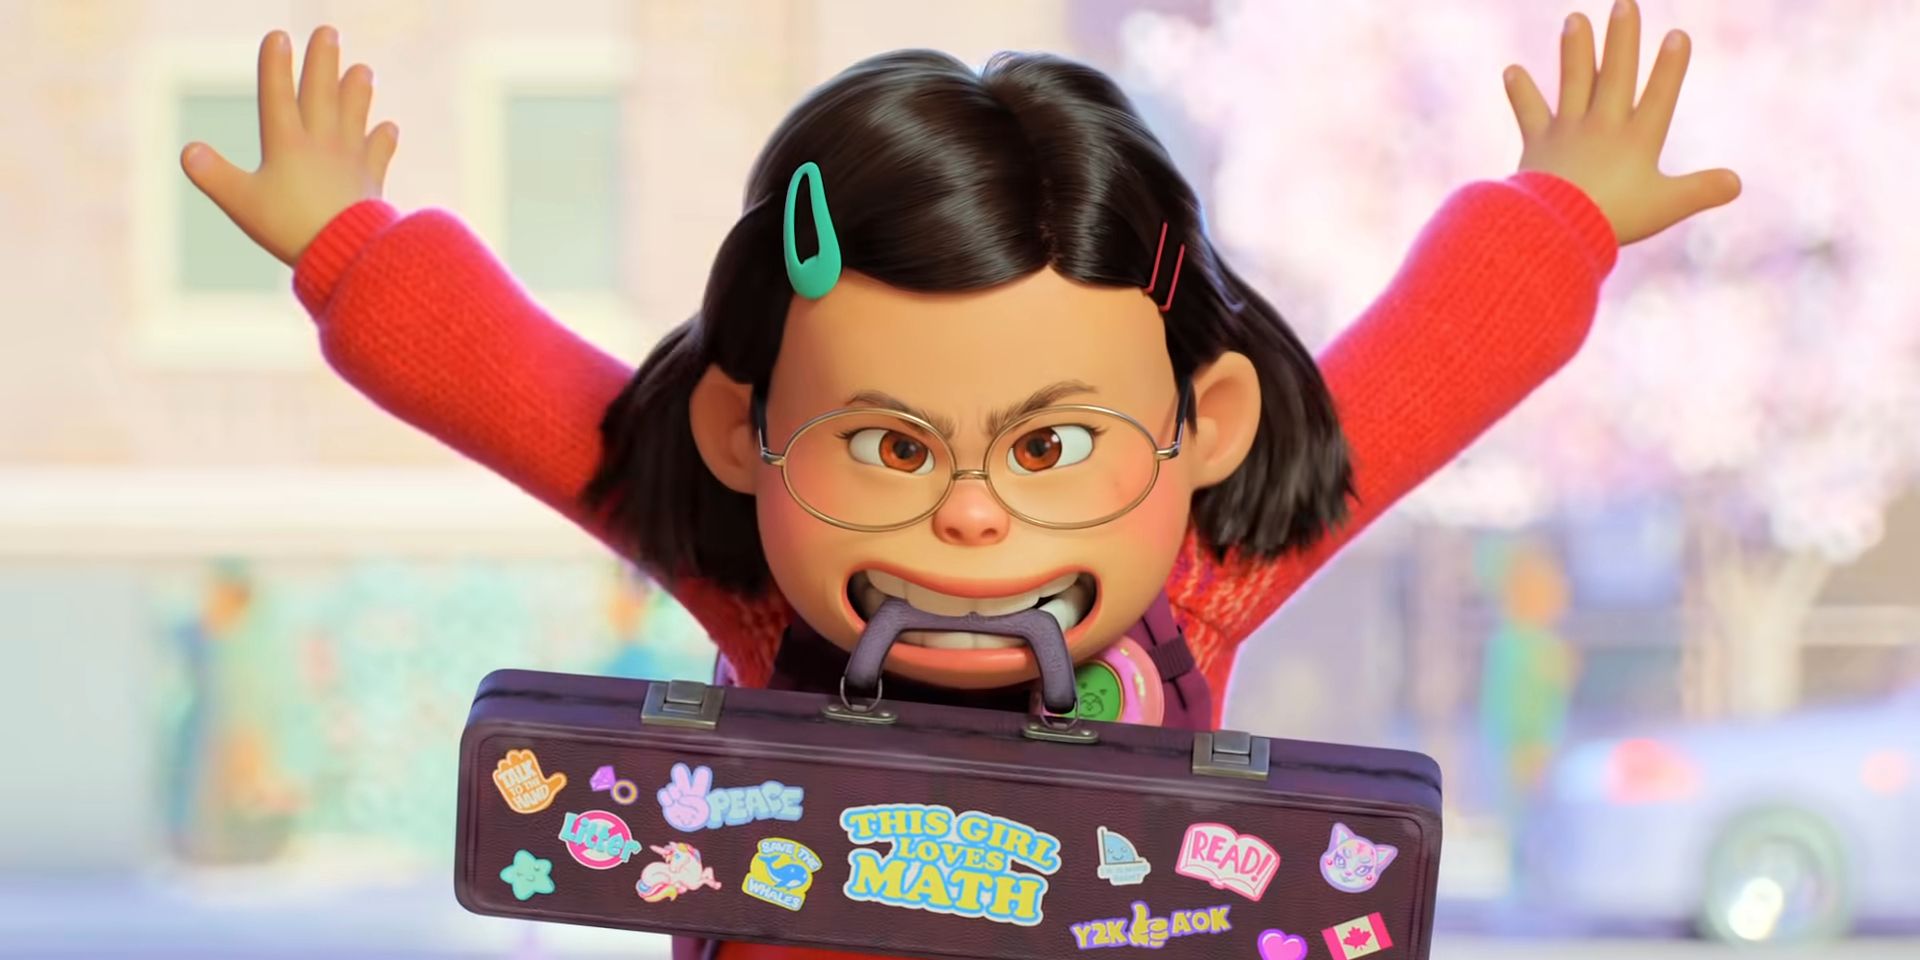 Mei holding her flute case in her mouth and posing dramtically